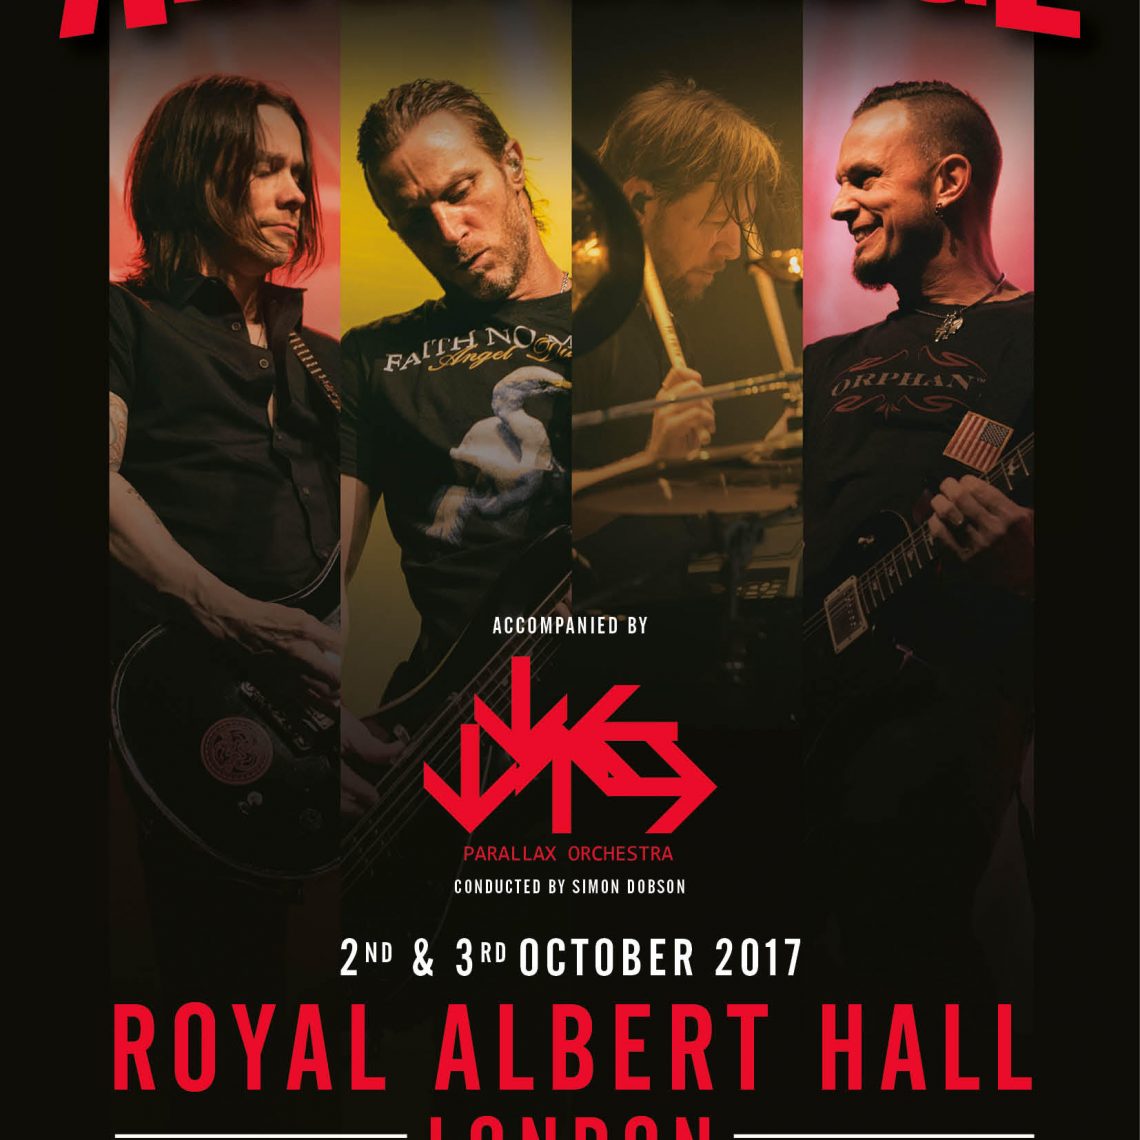 ALTER BRIDGE ANNOUNCE TWO VERY SPECIAL NIGHTS AT THE ROYAL ALBERT HALL